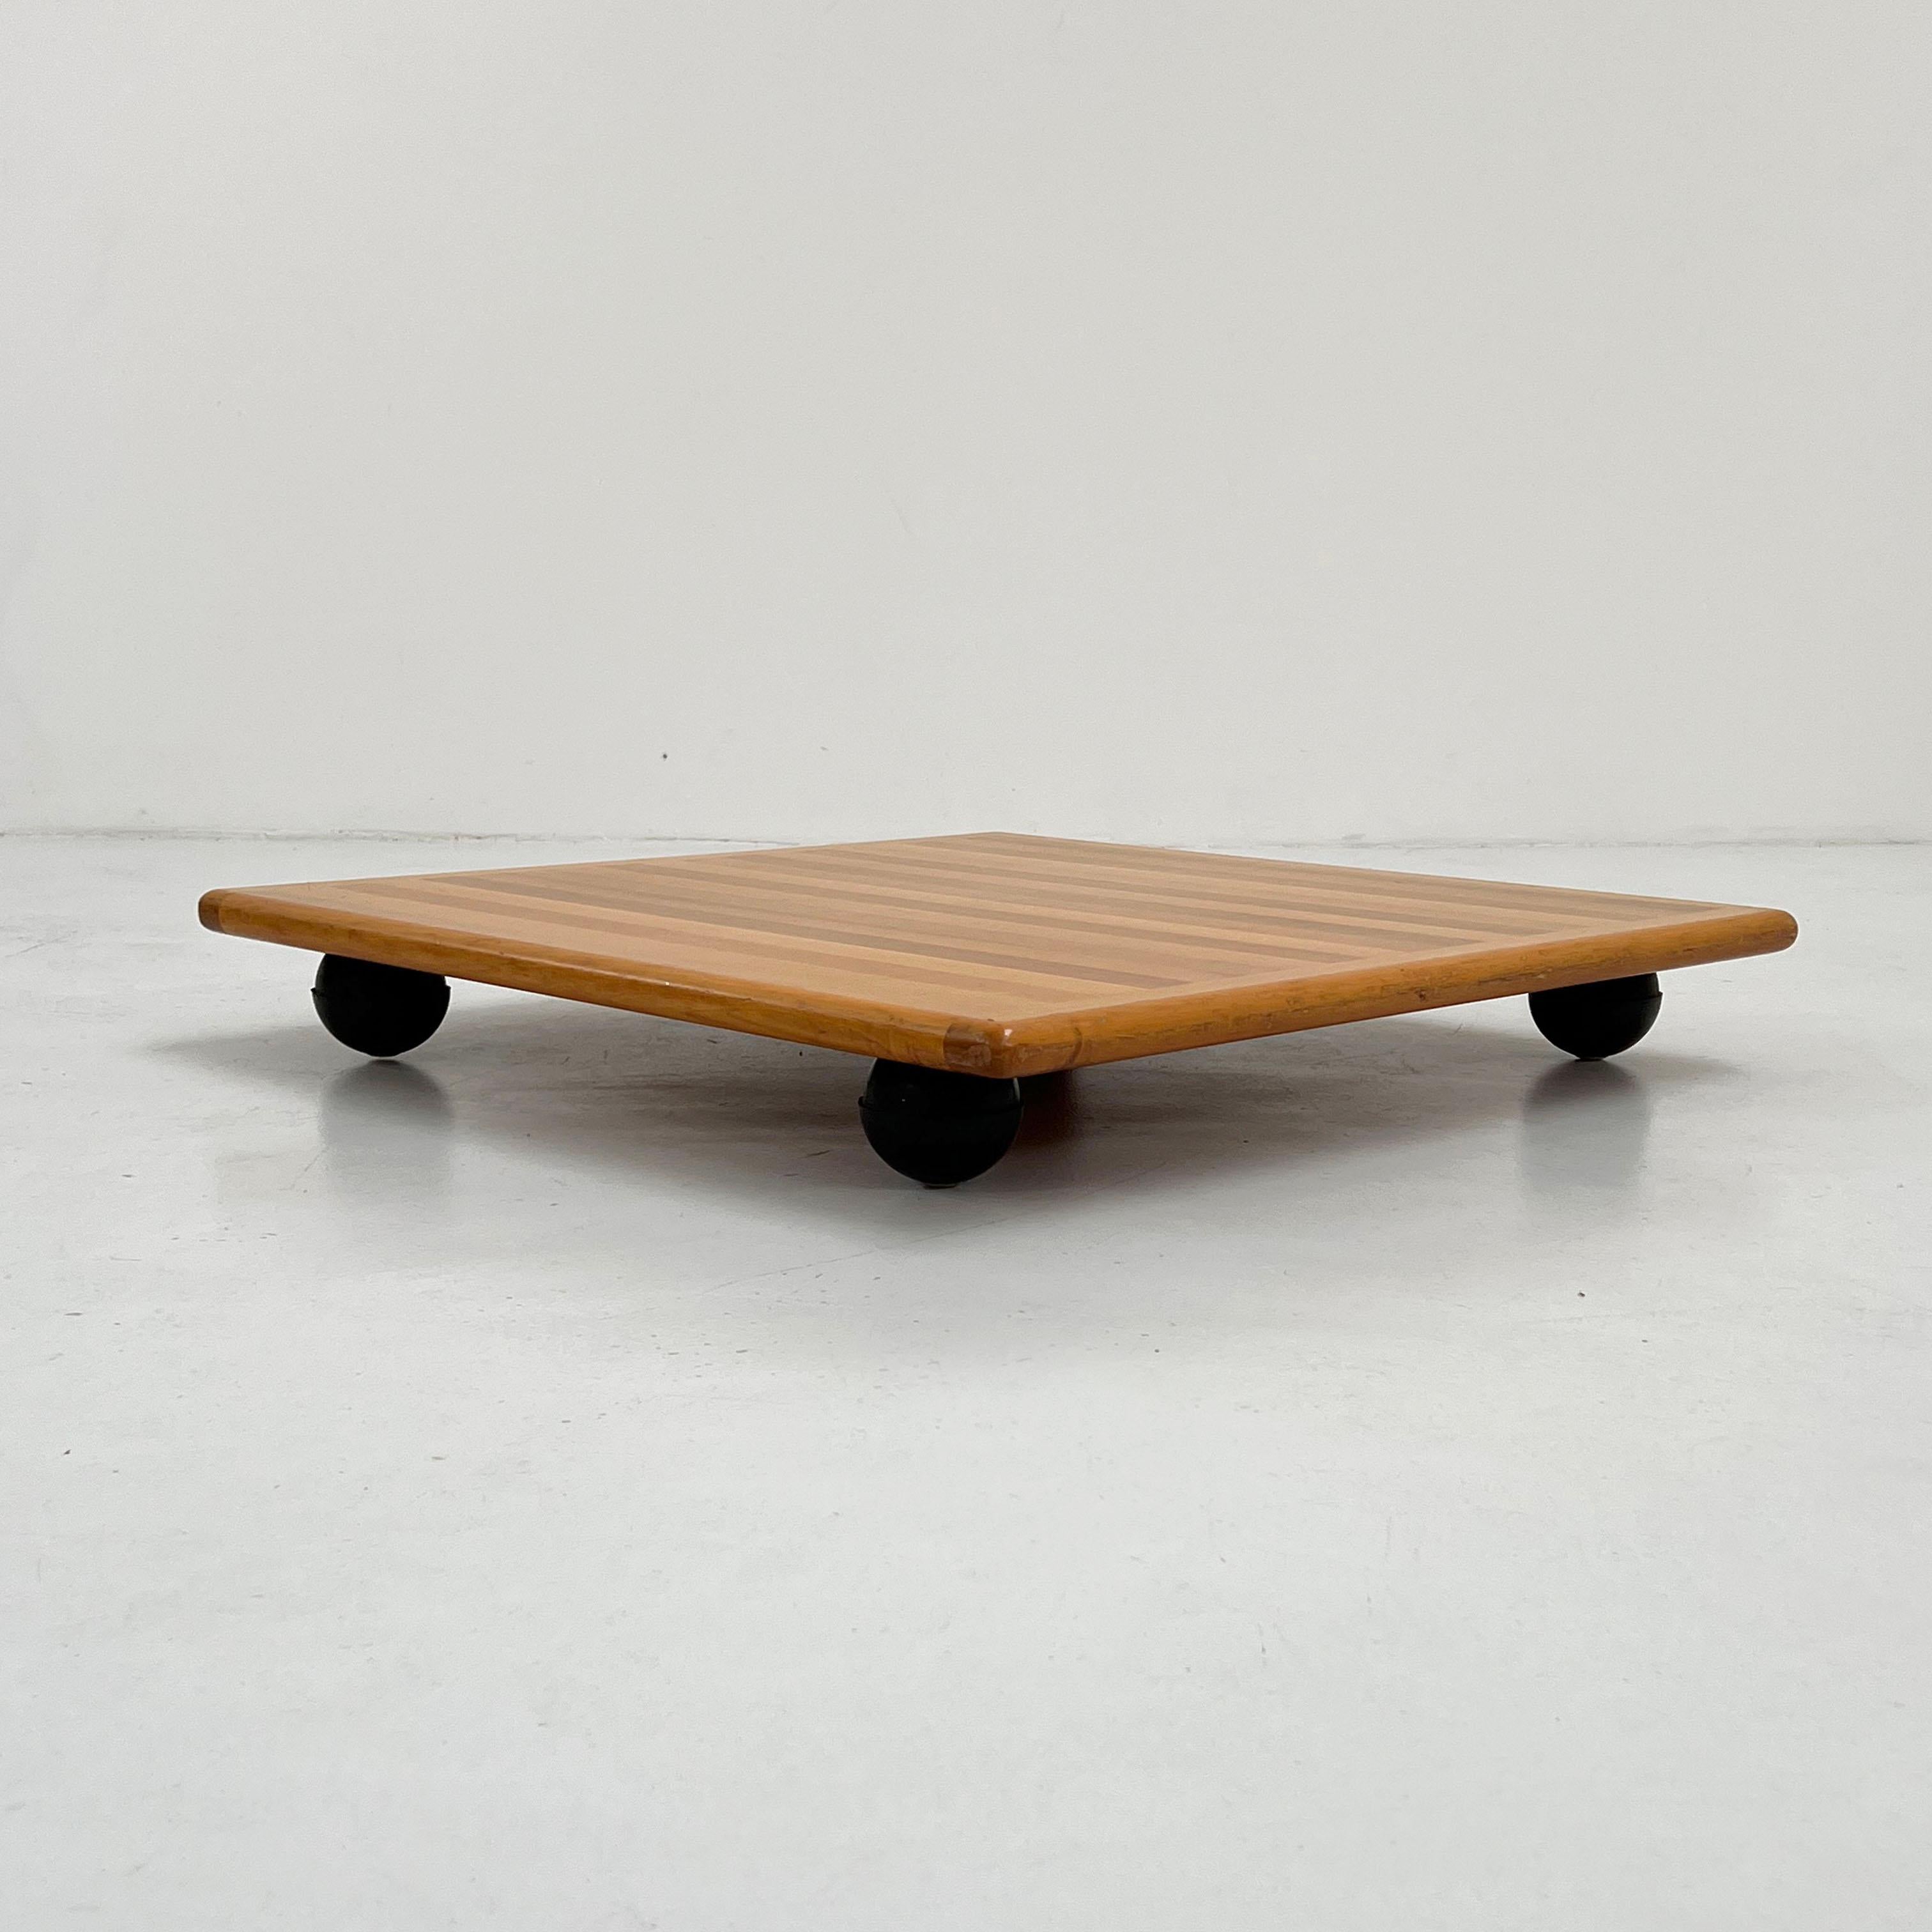 Designer - Mario Bellini
Producer - Cassina
Model - Pianura Coffee Table
Design Period - Seventies
Measurements - Width 80 cm x Depth 80 cm x Height 11 cm 
Materials - Wood
Color - Black, Brown
Comments - Light wear consistent with age and use.